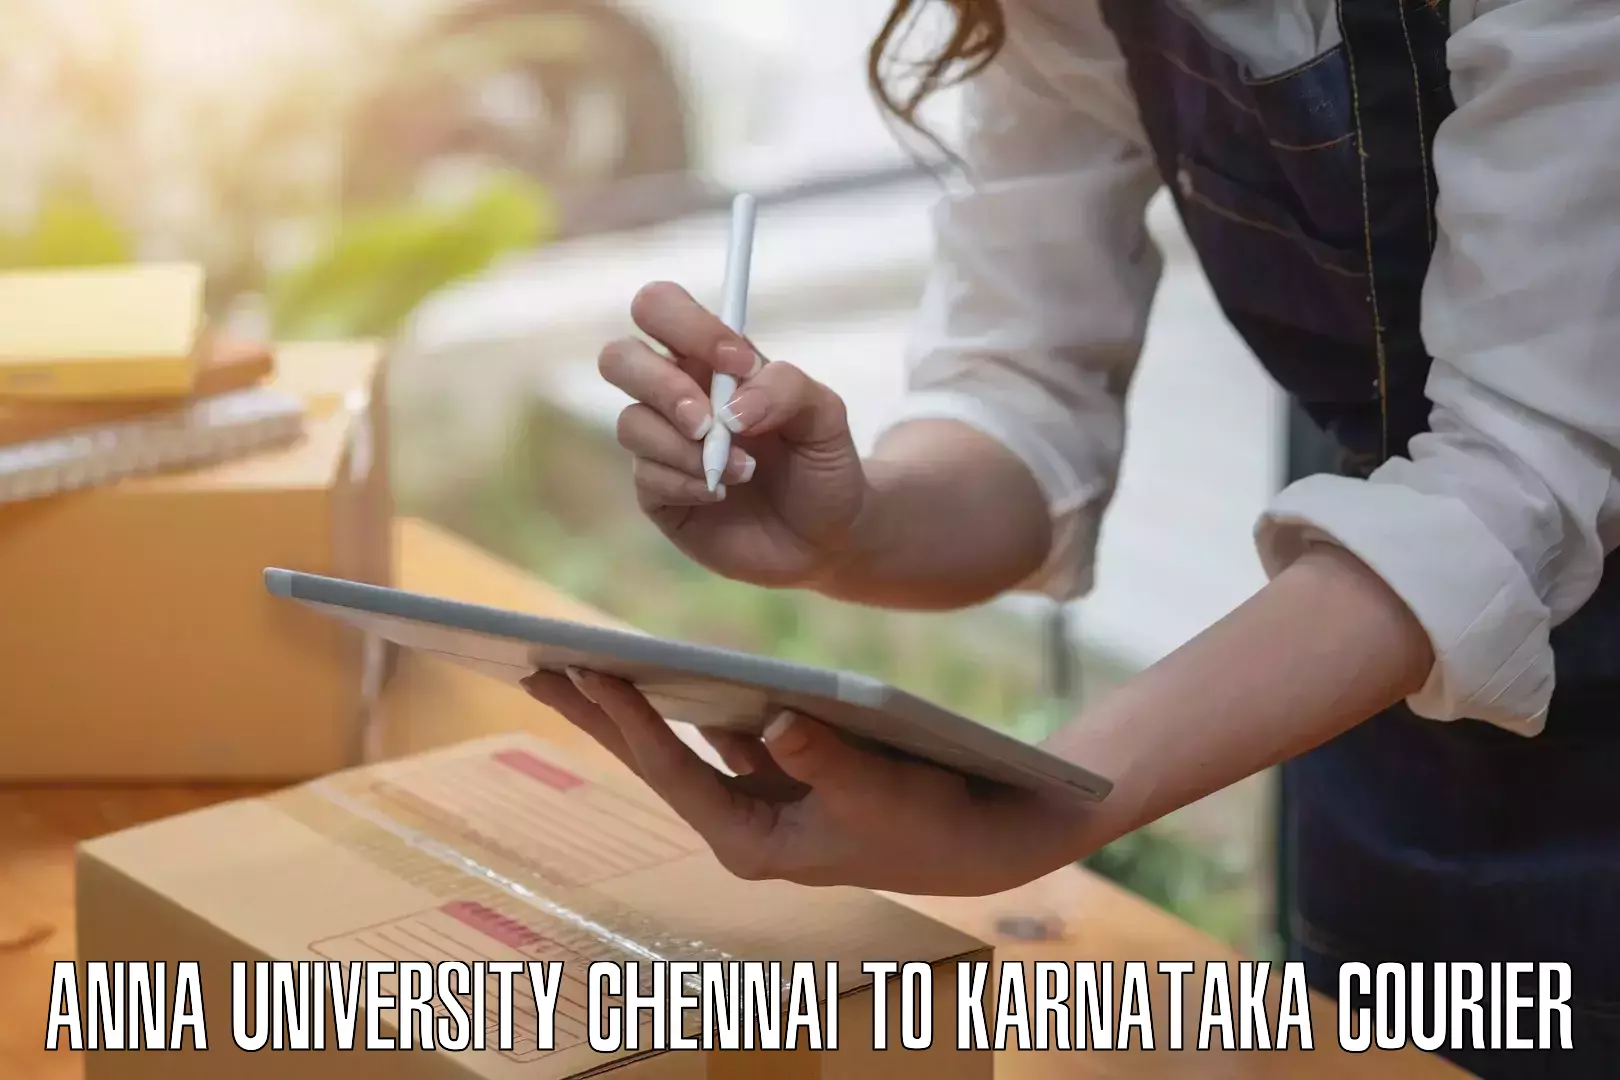 Luggage shipment strategy in Anna University Chennai to Indian Institute of Science Bangalore